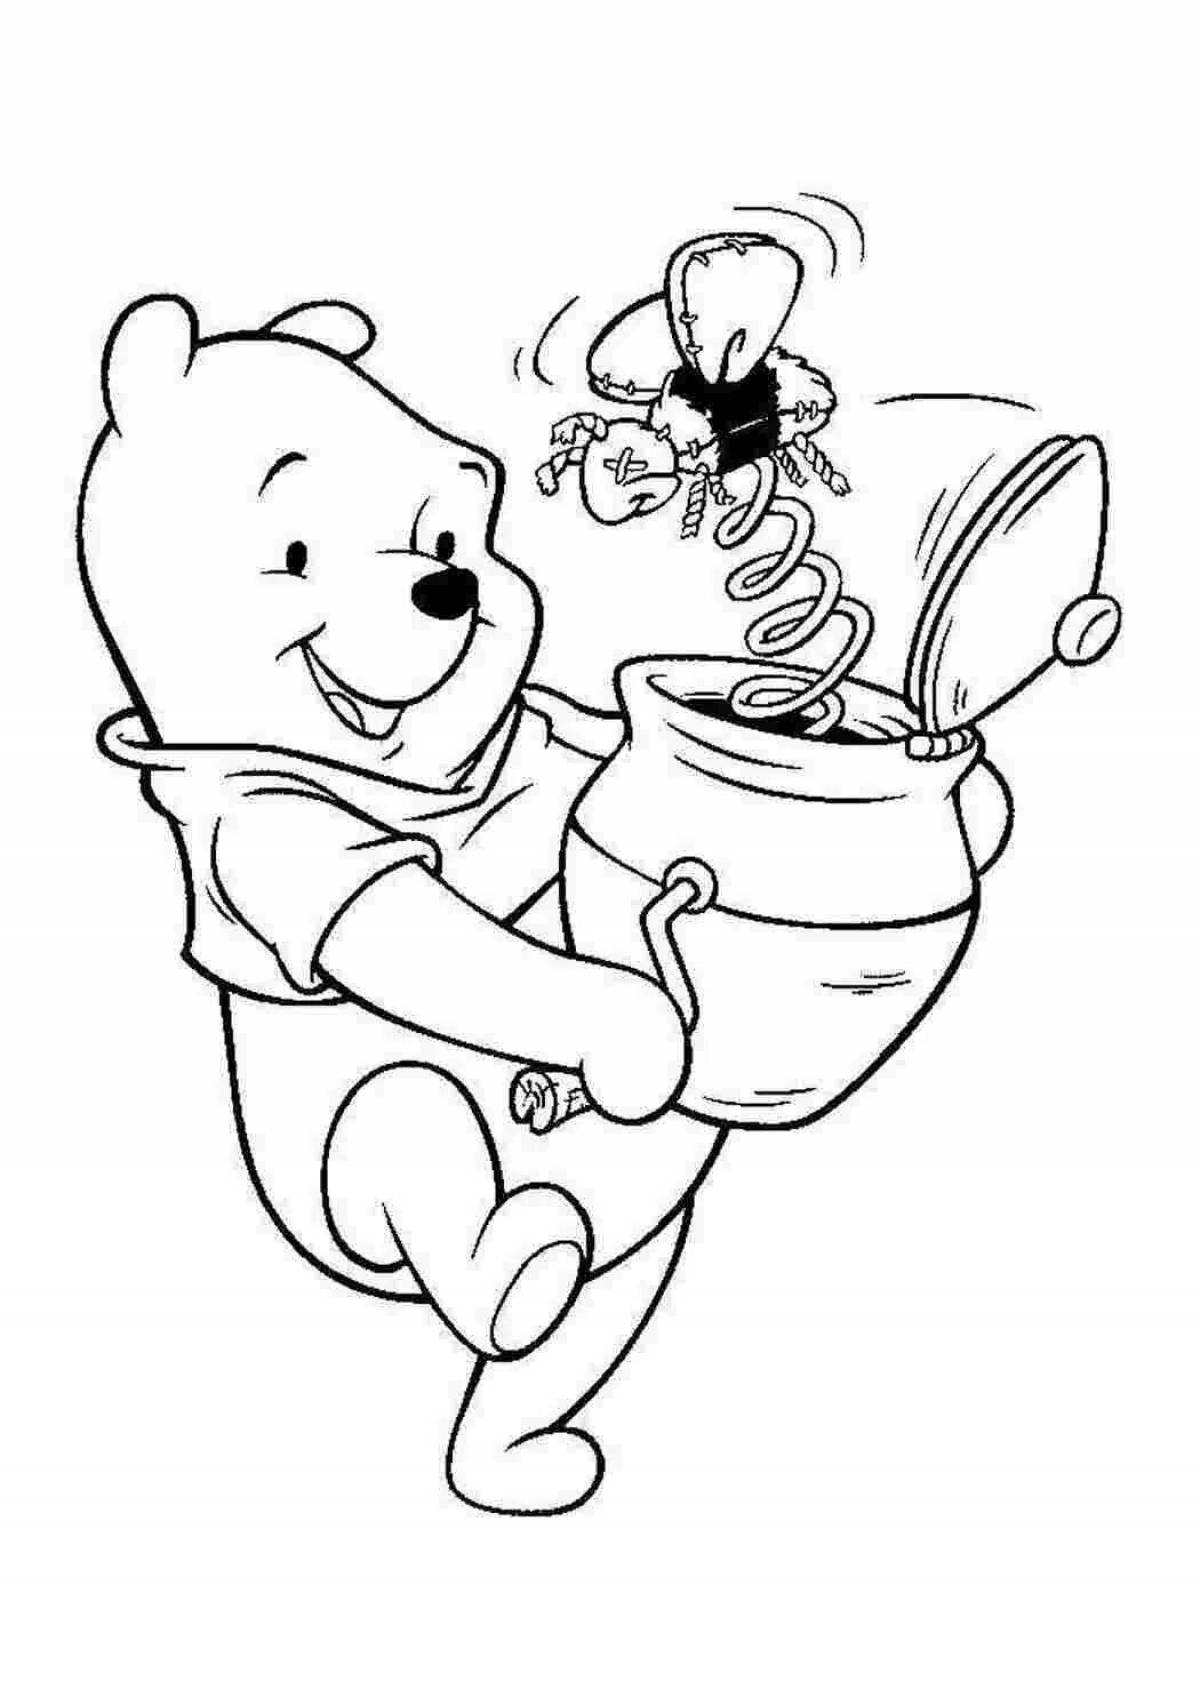 Coloring book from popular cartoons